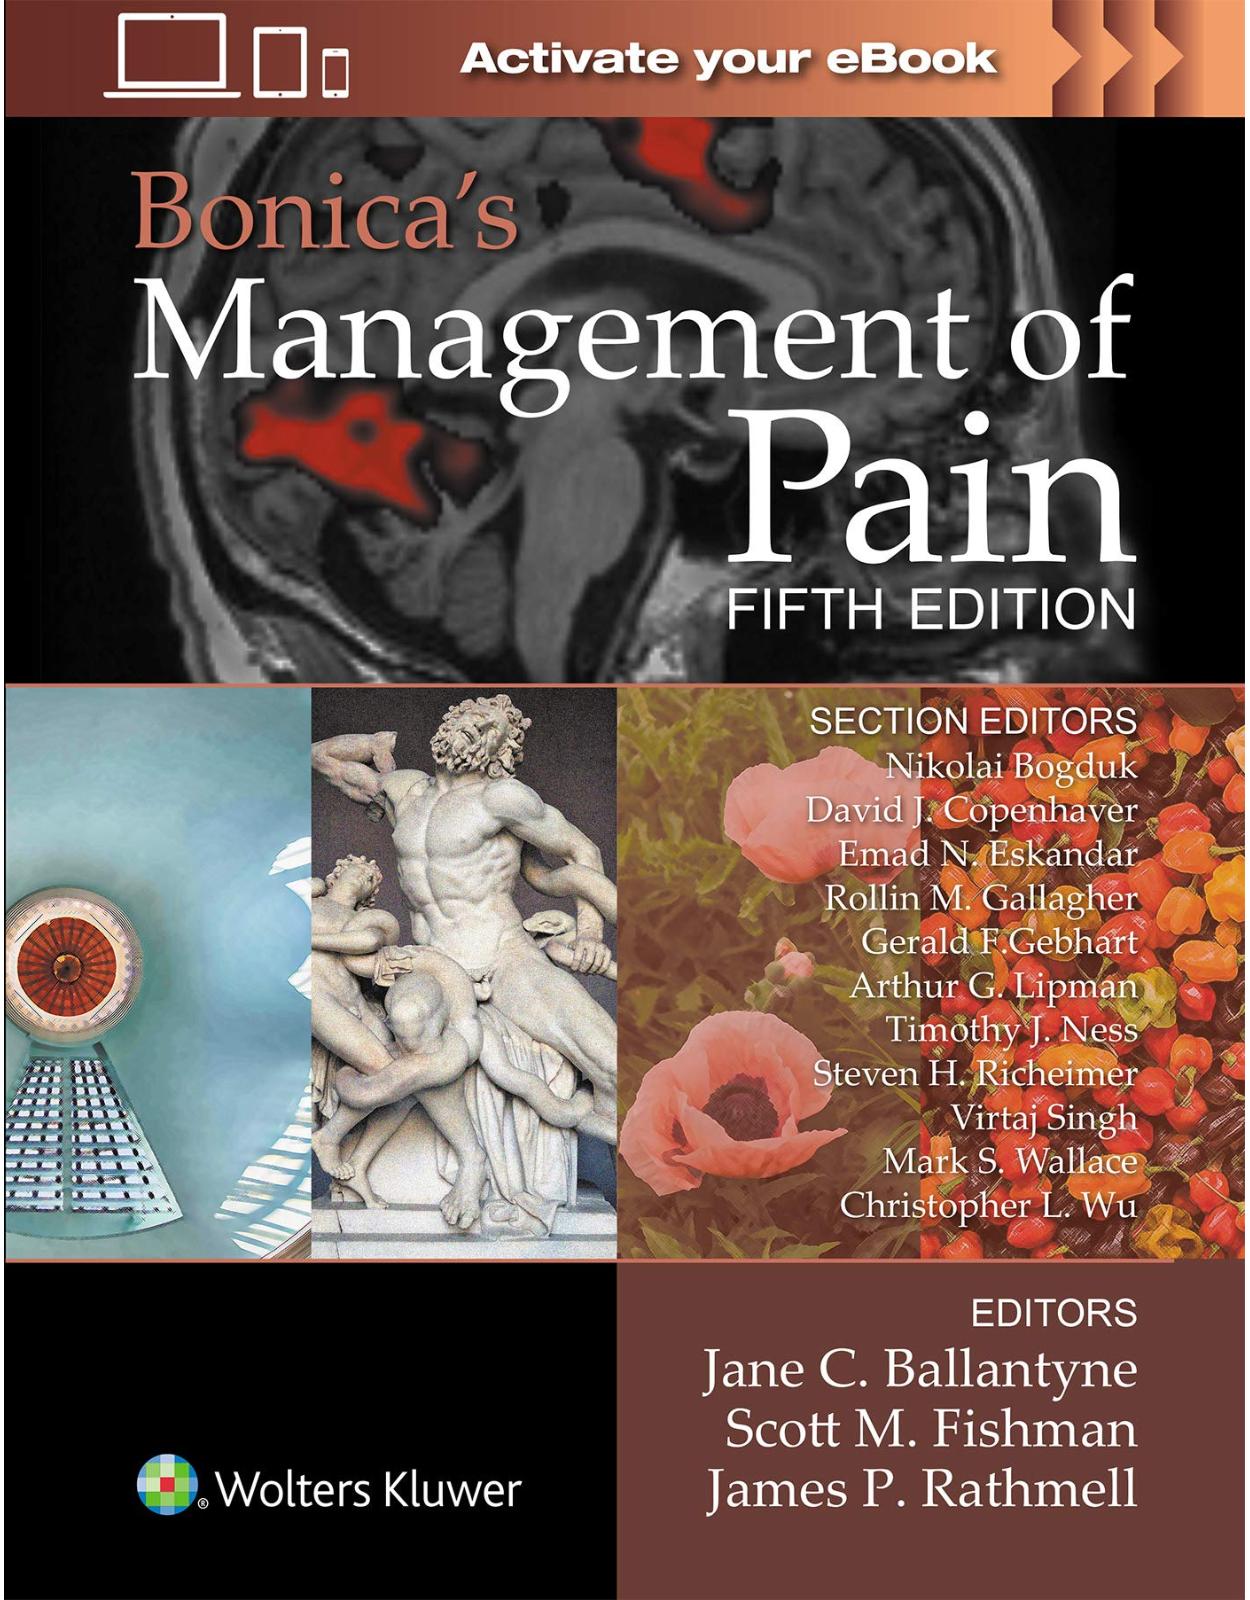 Bonica’s Management of Pain, Fifth edition